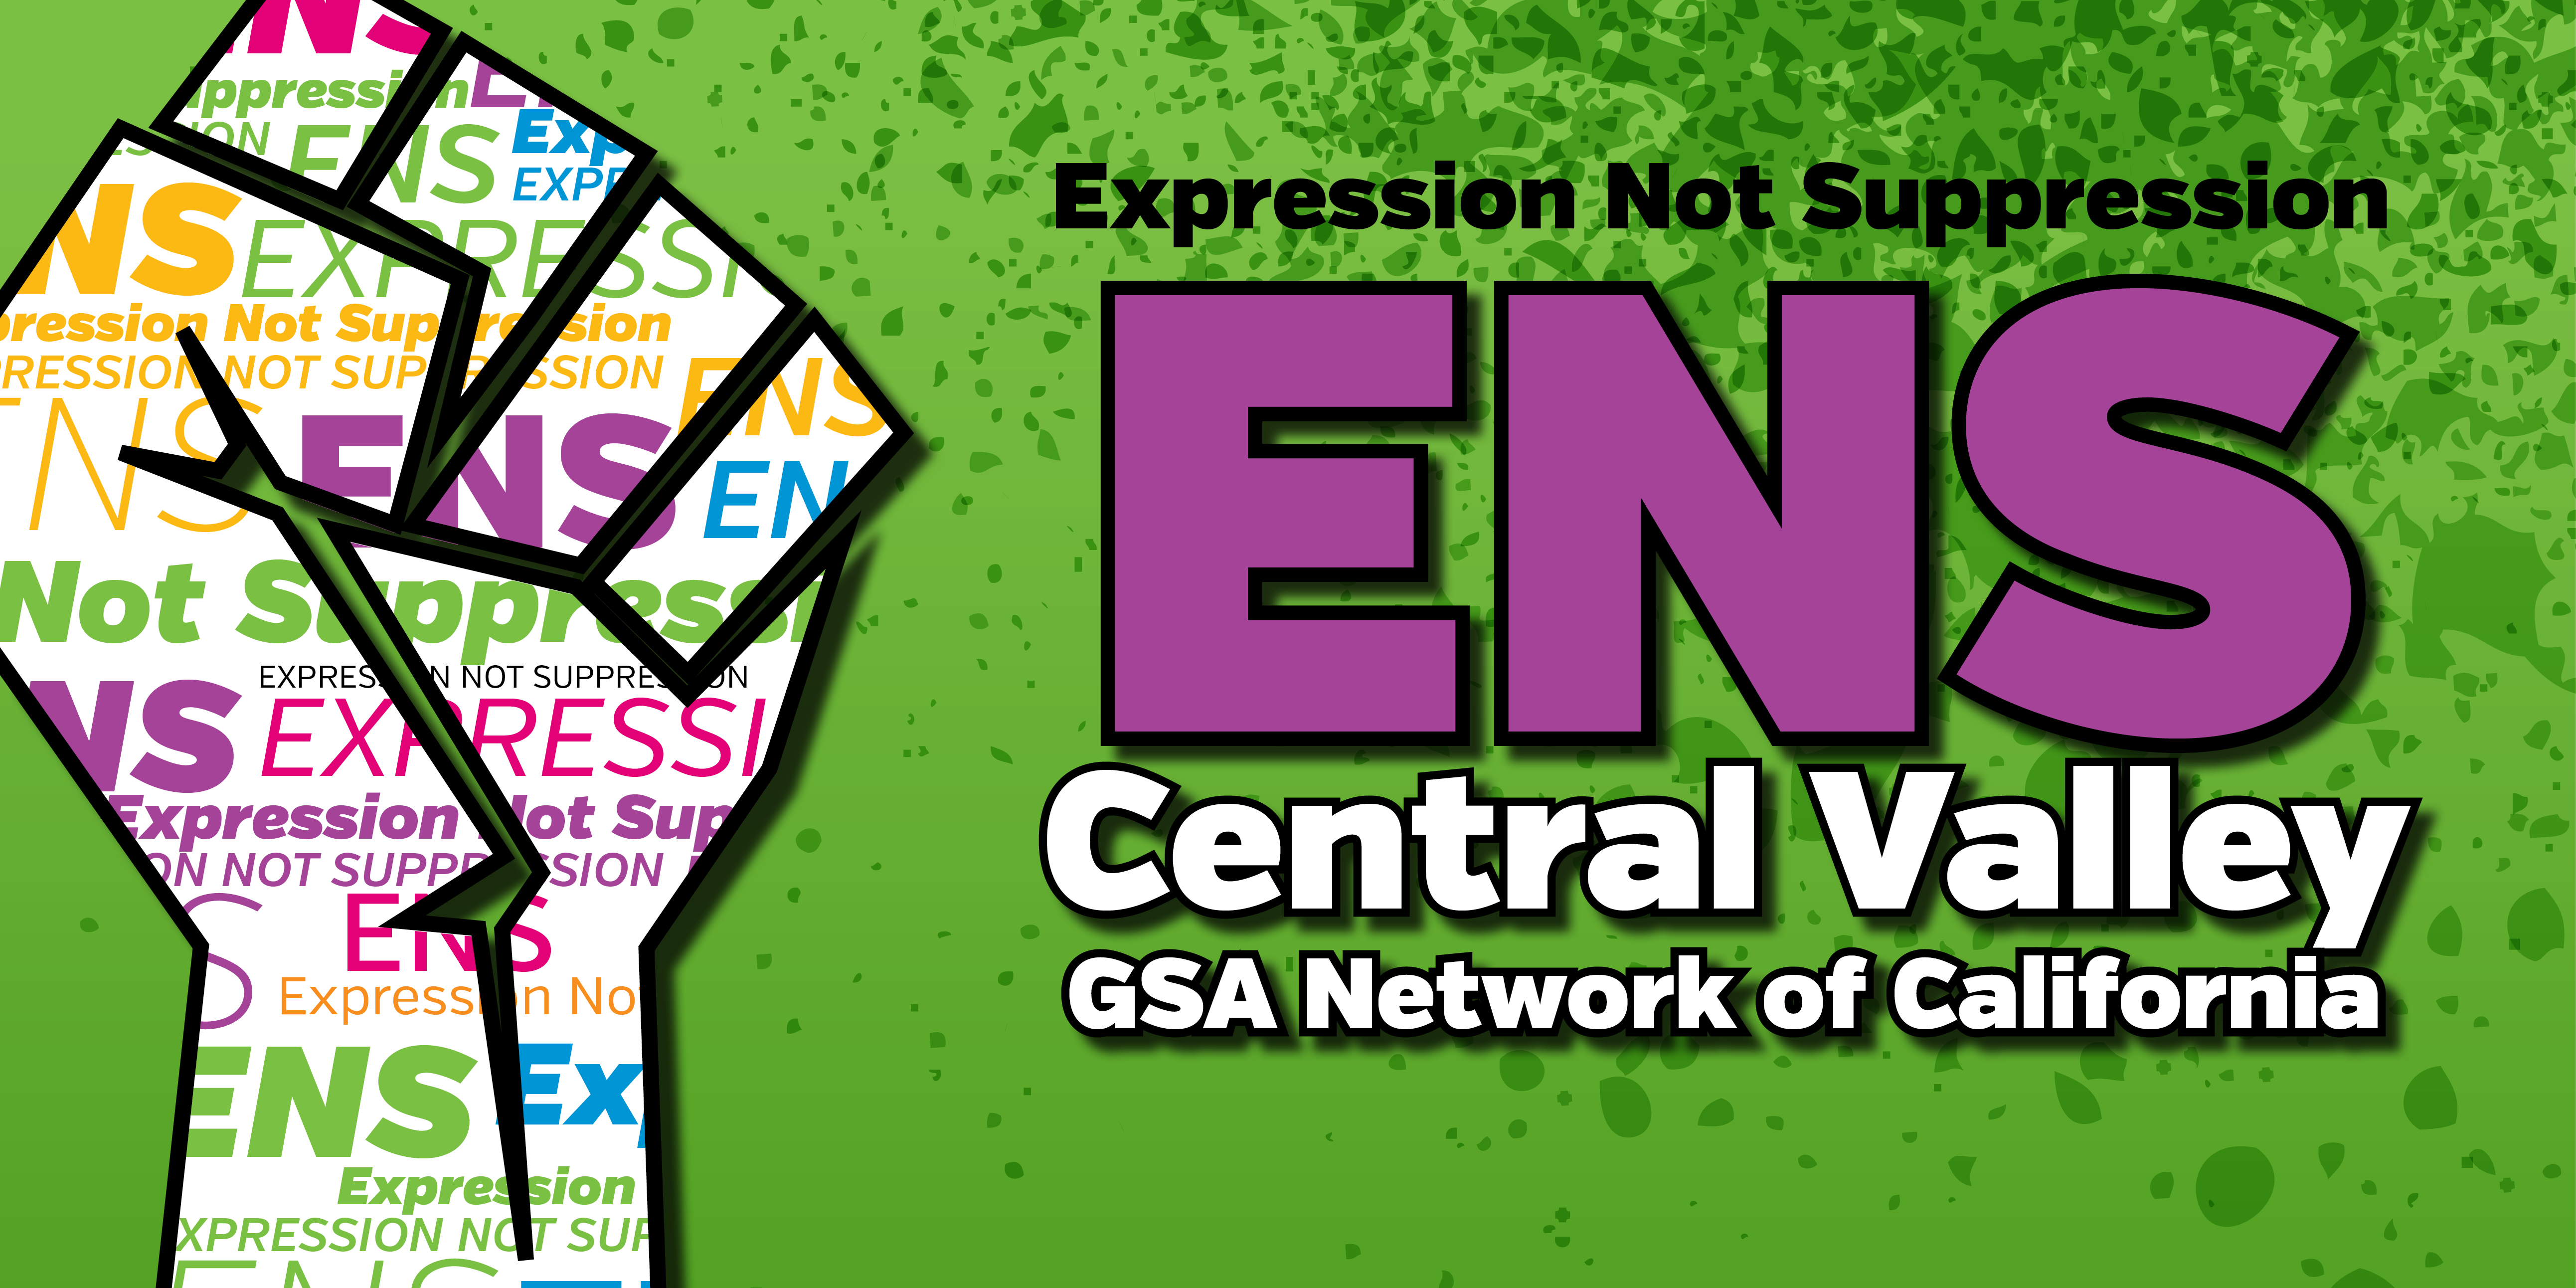 ENS Expression Not Suppression in the Central Valley by GSA Network of California. Image has a vibrant background with a fist graphic.